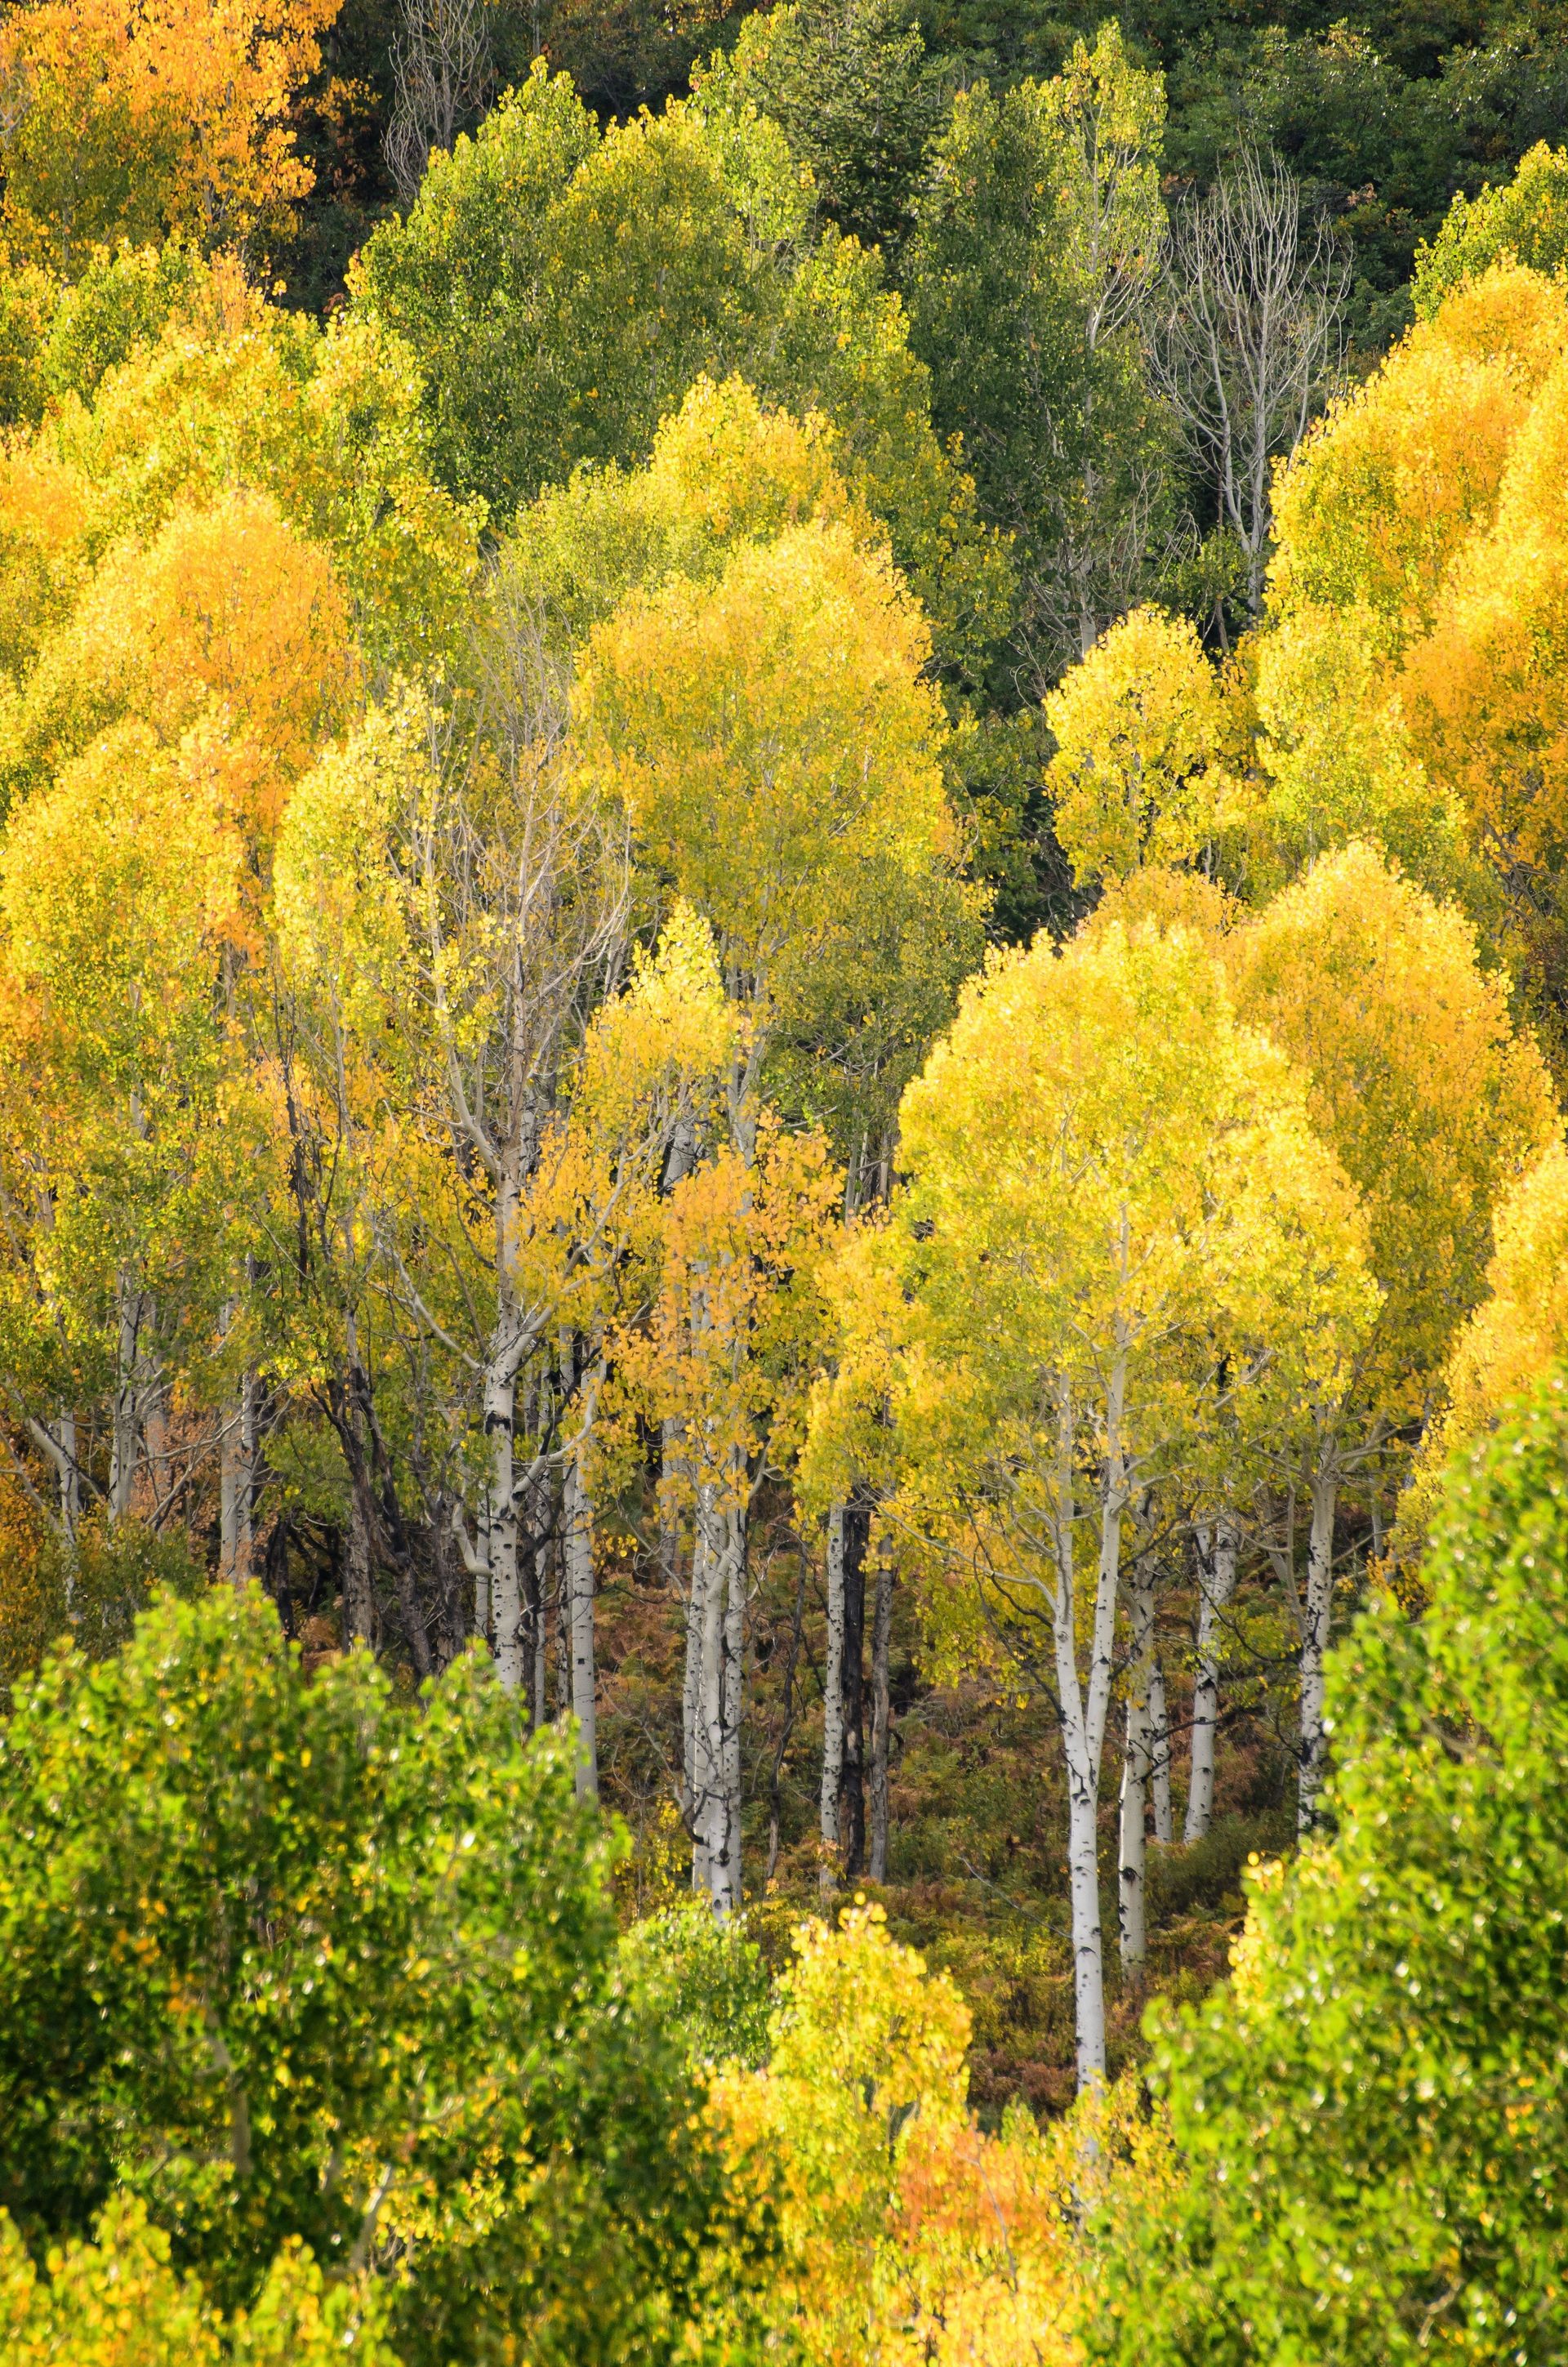 A grove of aspen trees with bright yellow leaves in the autumn.